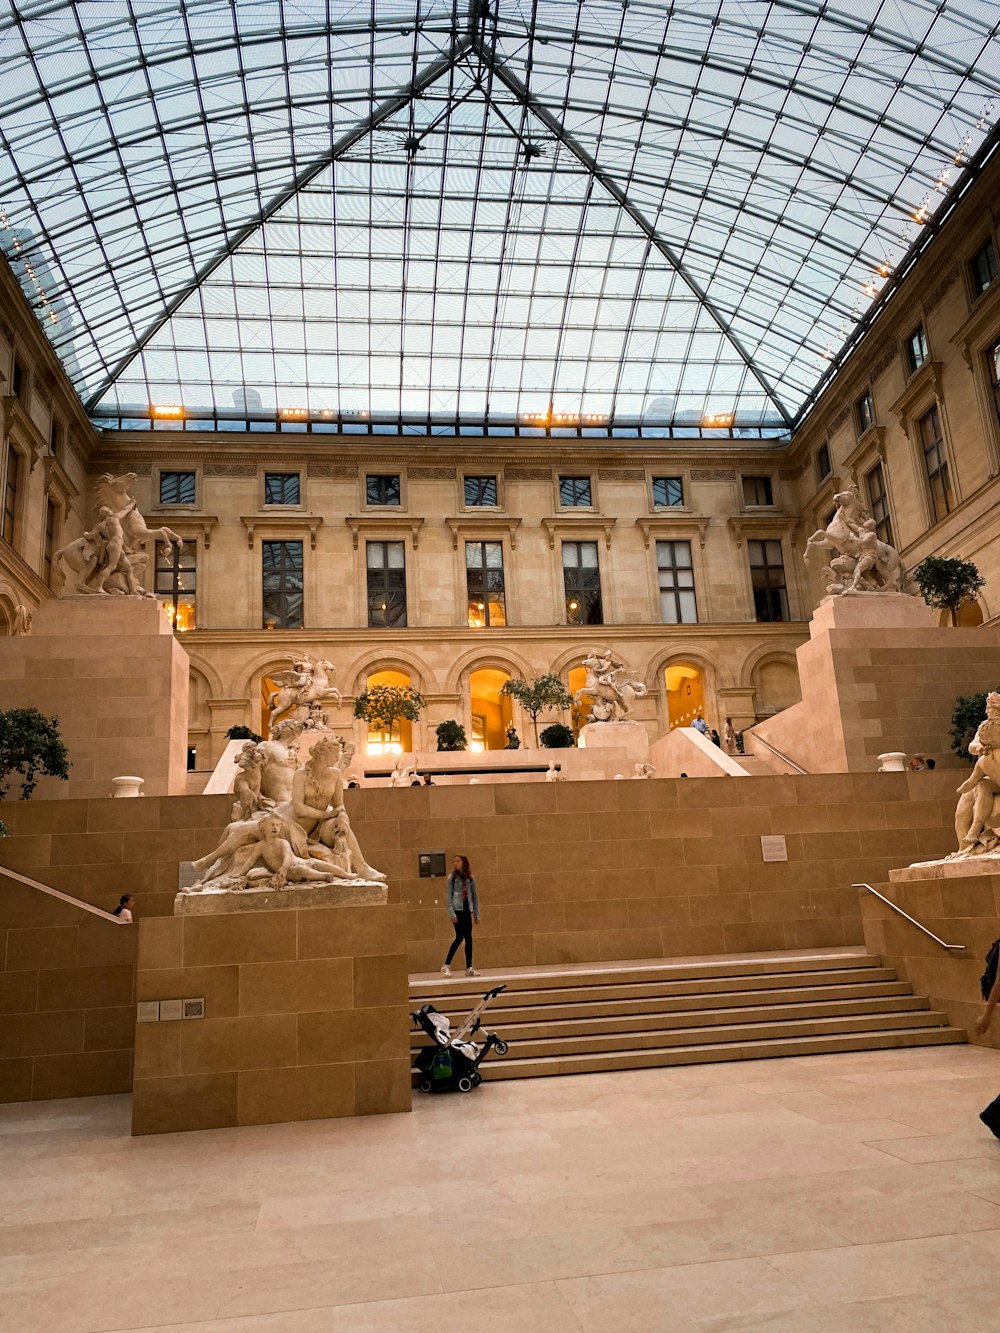 a large building with a glass roof and statues